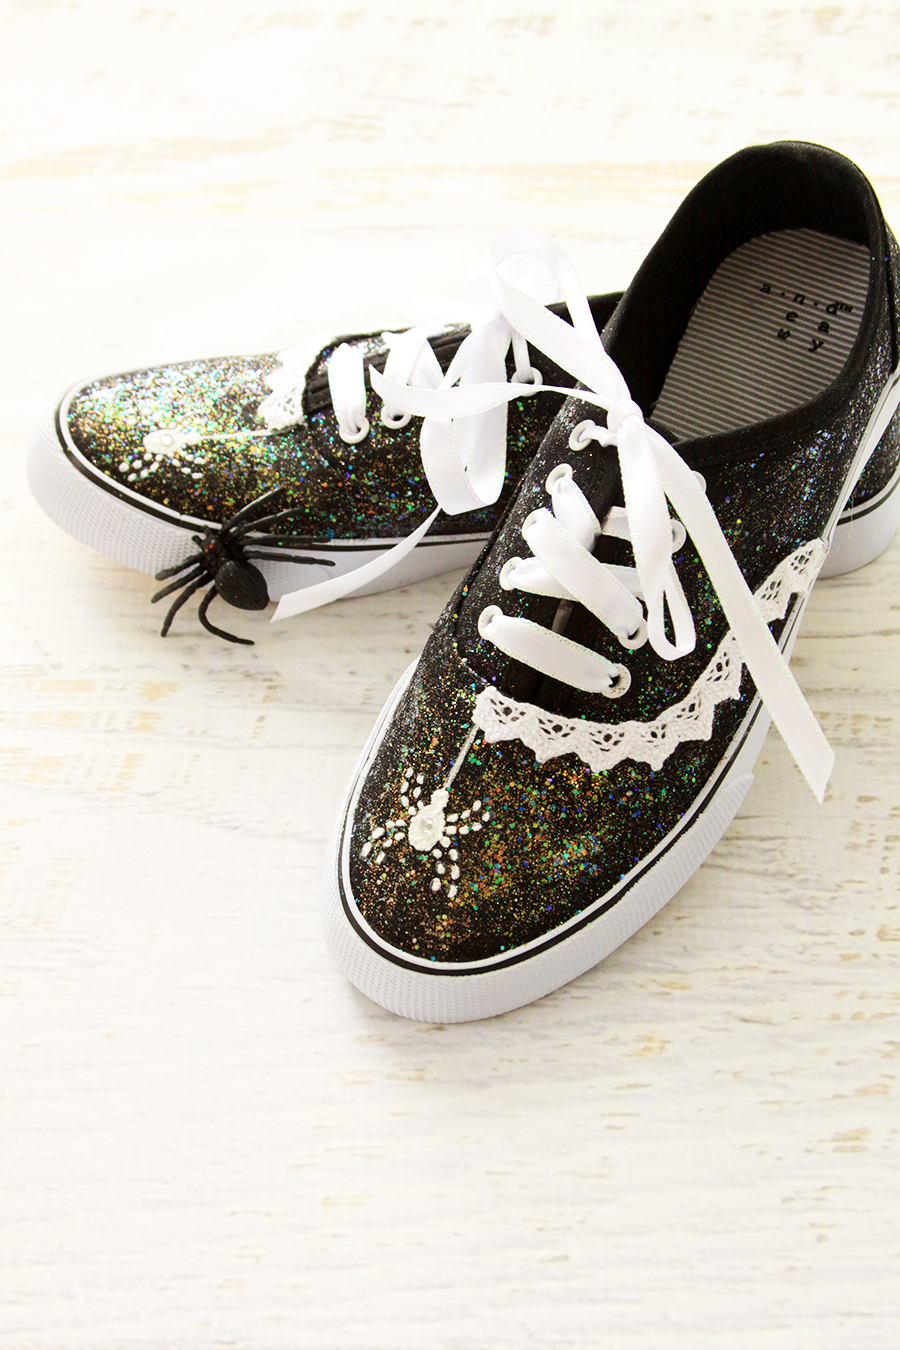 Discover 135+ diy glitter sneakers best